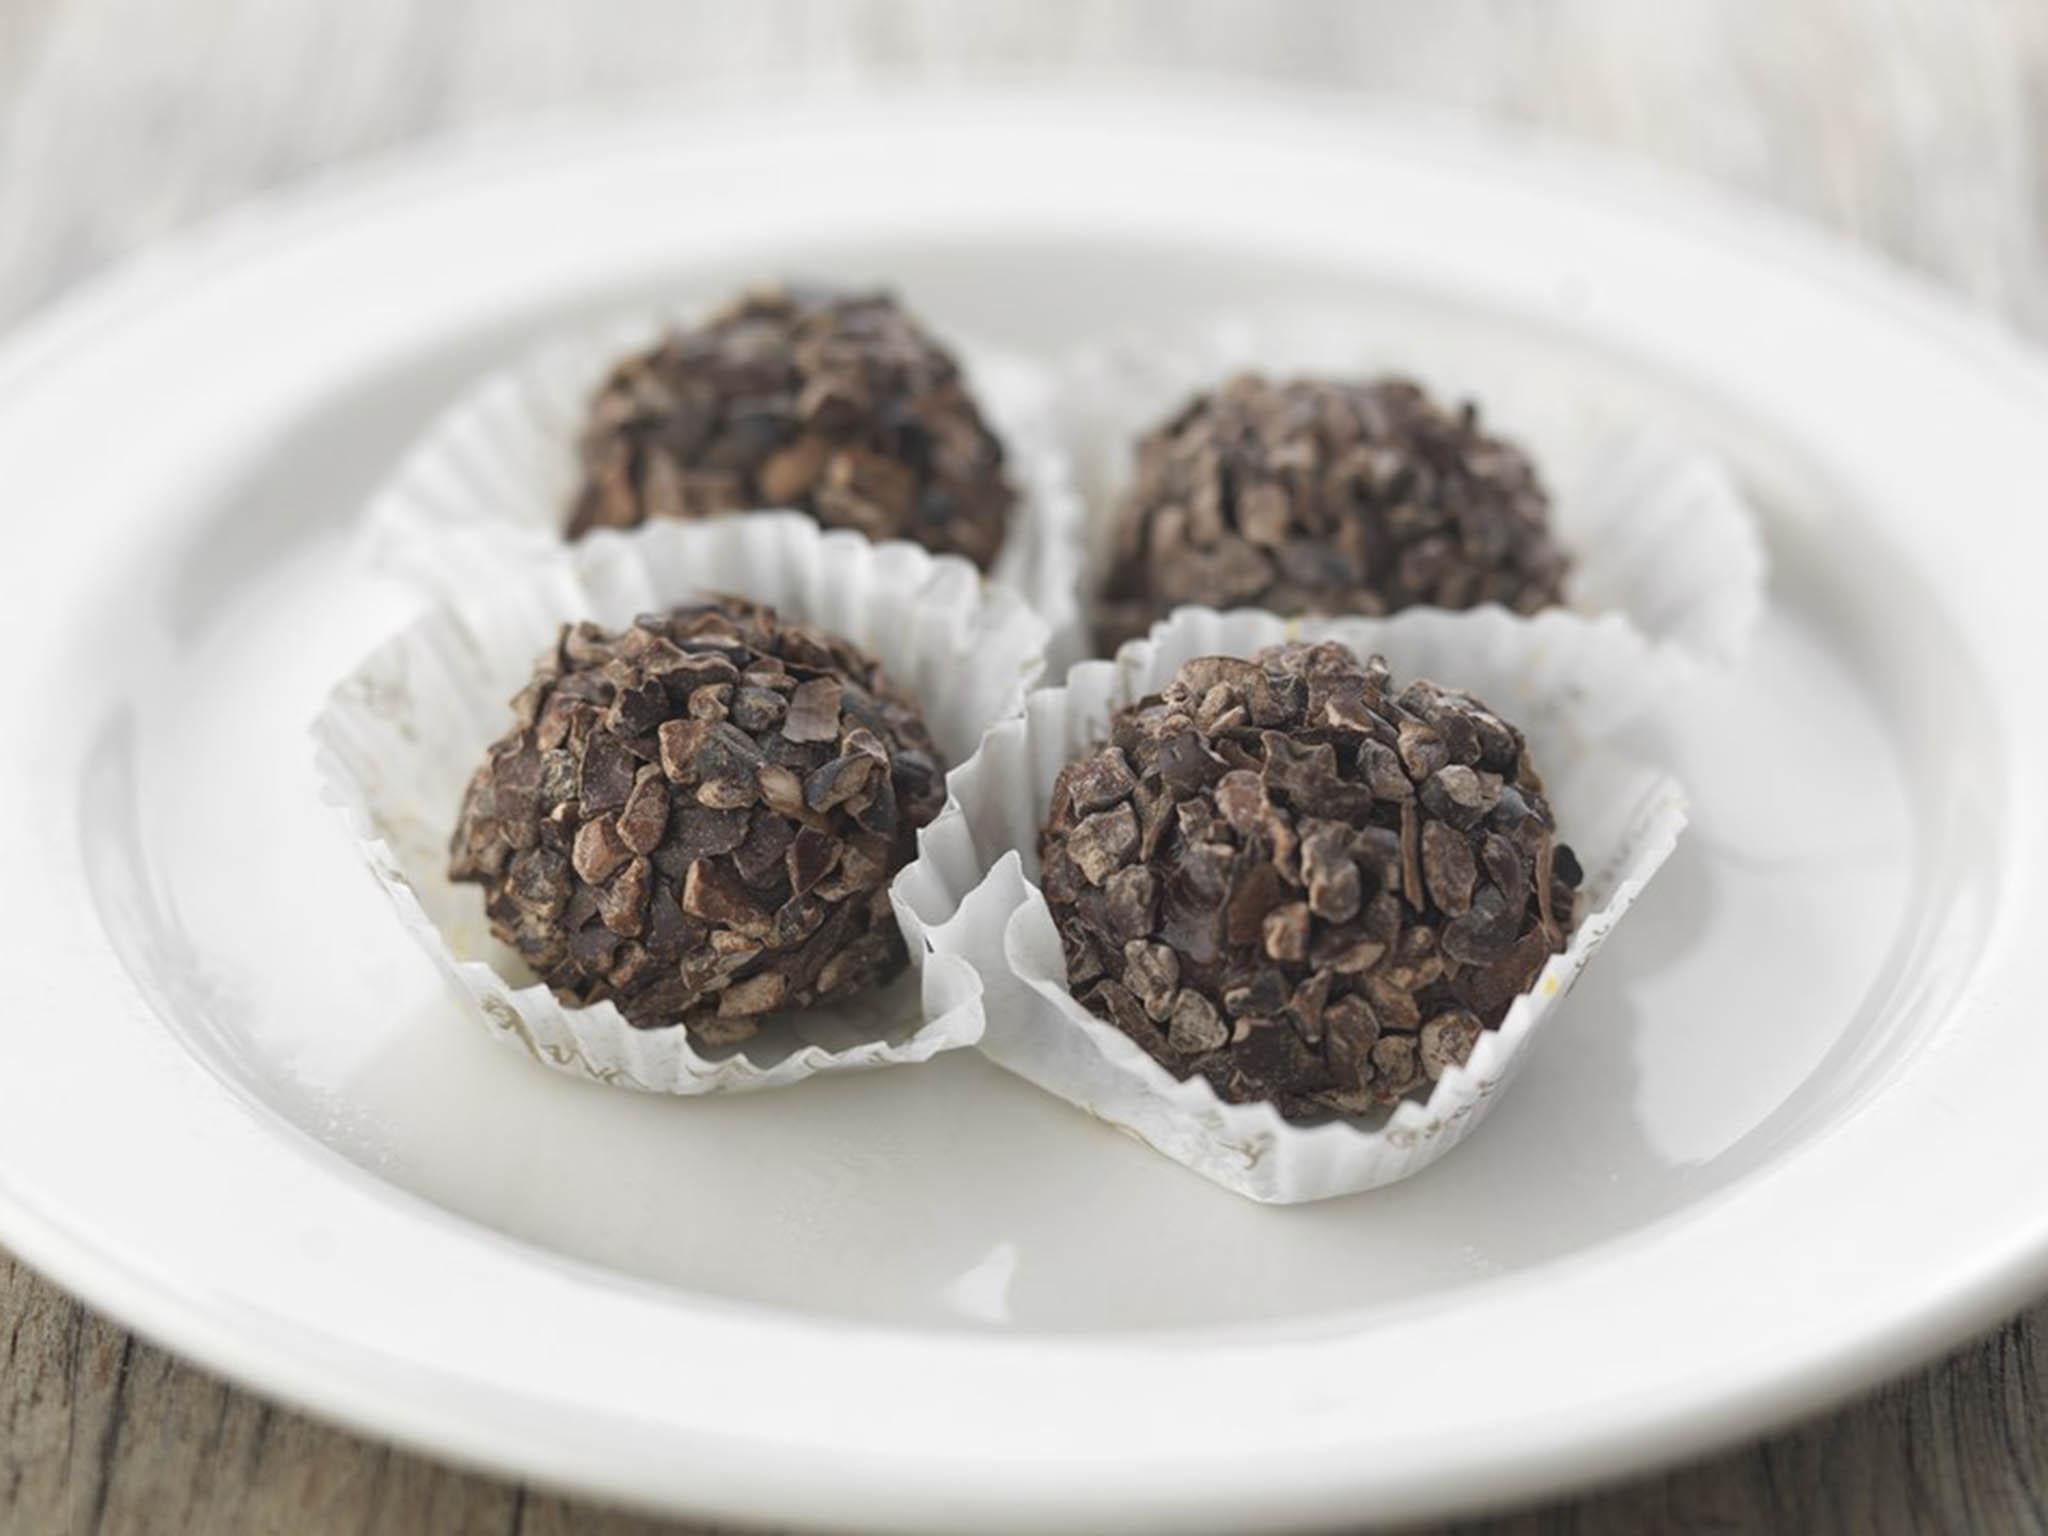 Chocolate truffles are made with store cupboard ingredients, which makes them even more irresistable